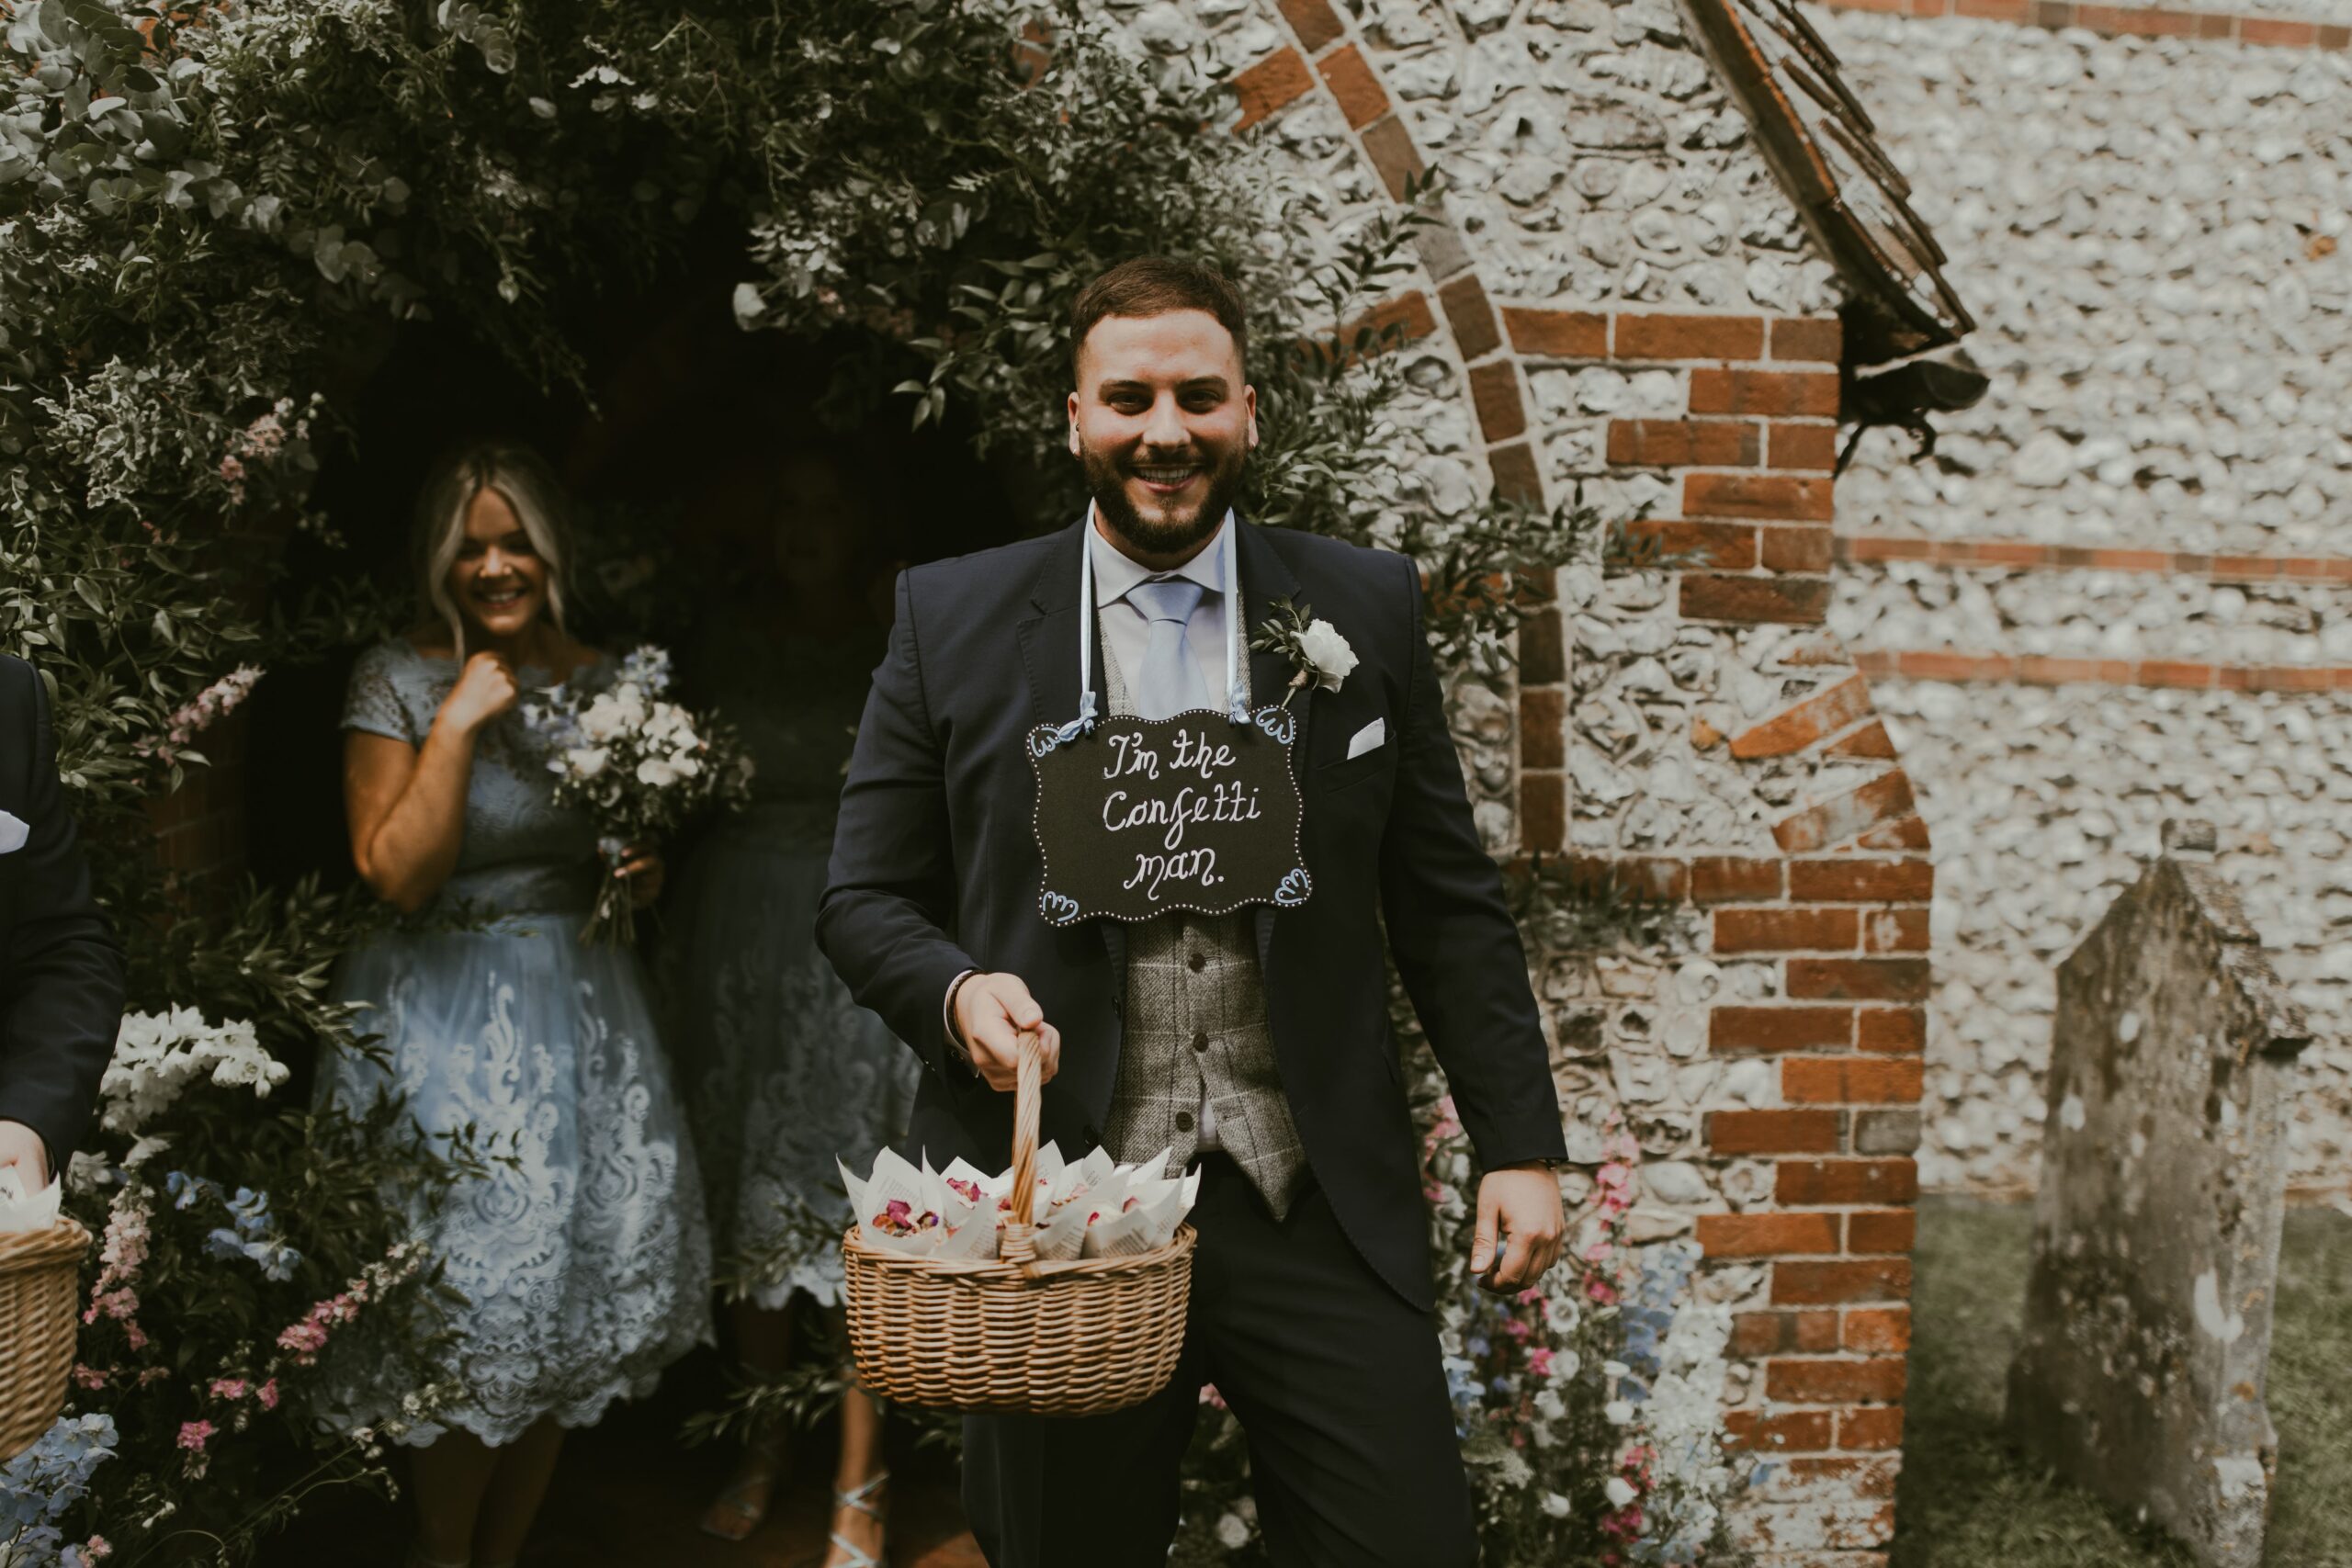 barn weddings in hampshire, the old dairy hampshire, hampshire wedding venue, The Old Dairy in Andover, The Old Dairy, The Old Dairy Andover, Hampshire barn wedding venue